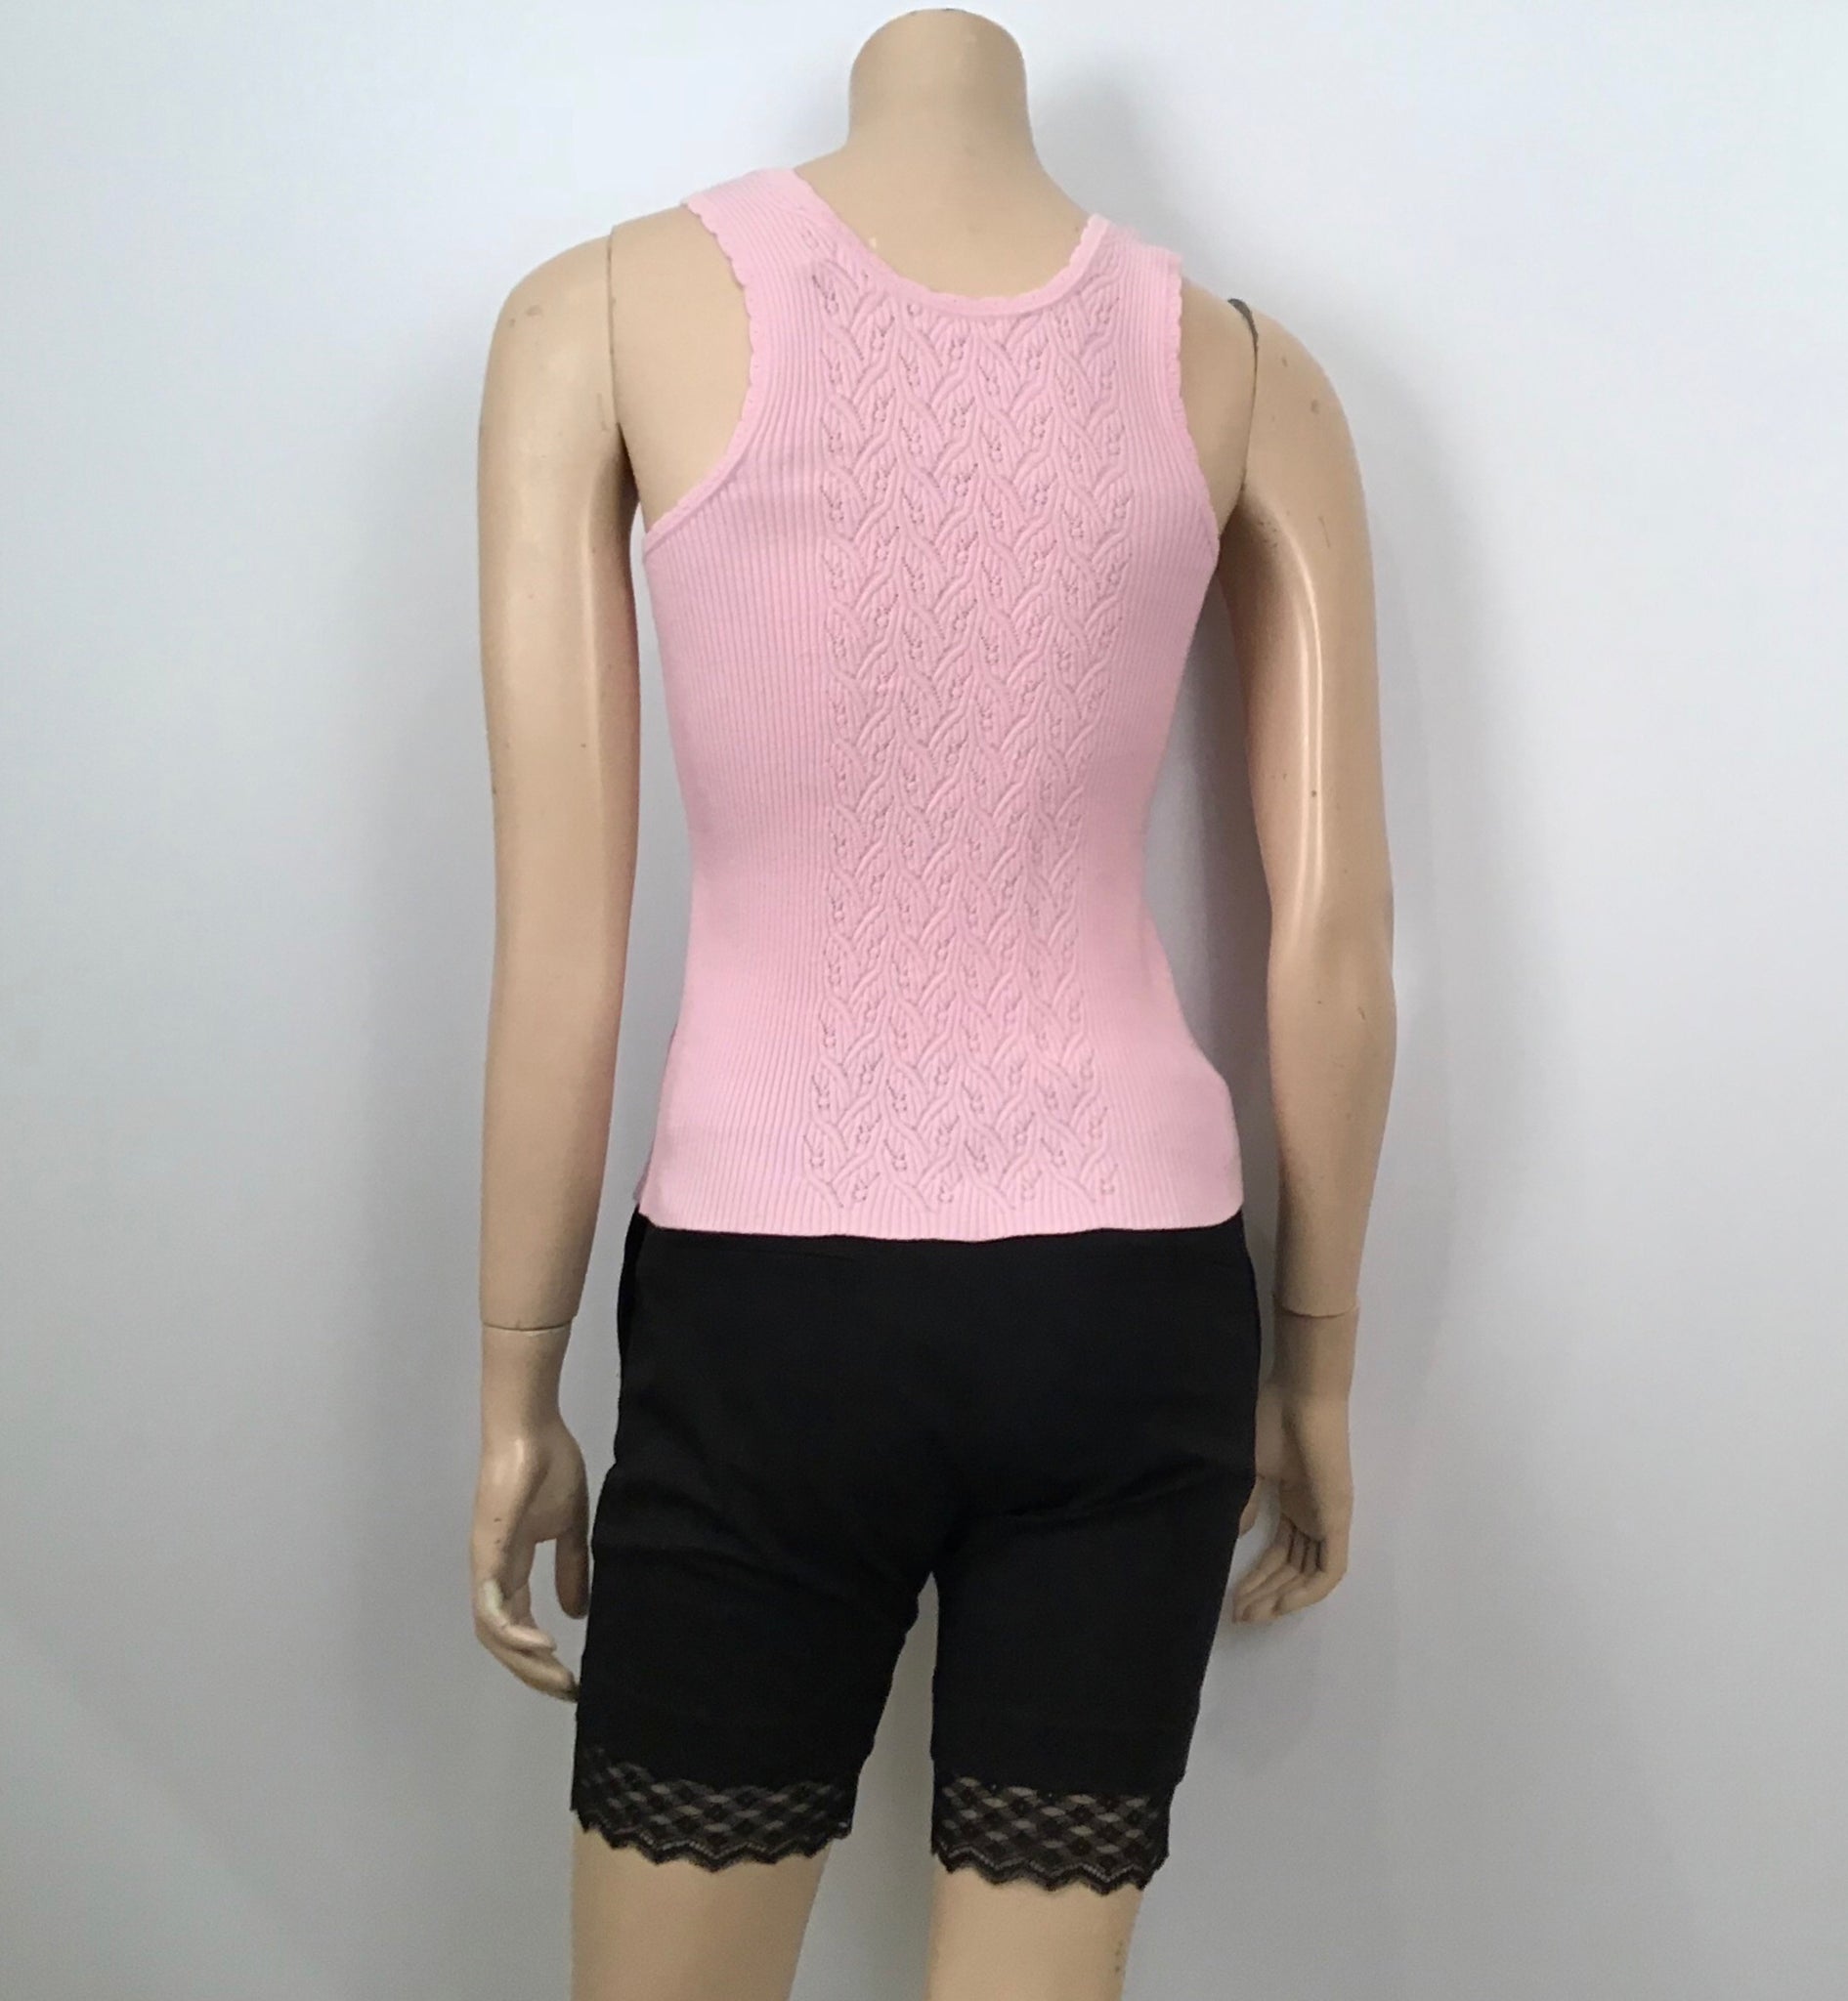 Chanel Pink Ribbed Tank Top Blouse US 4/6